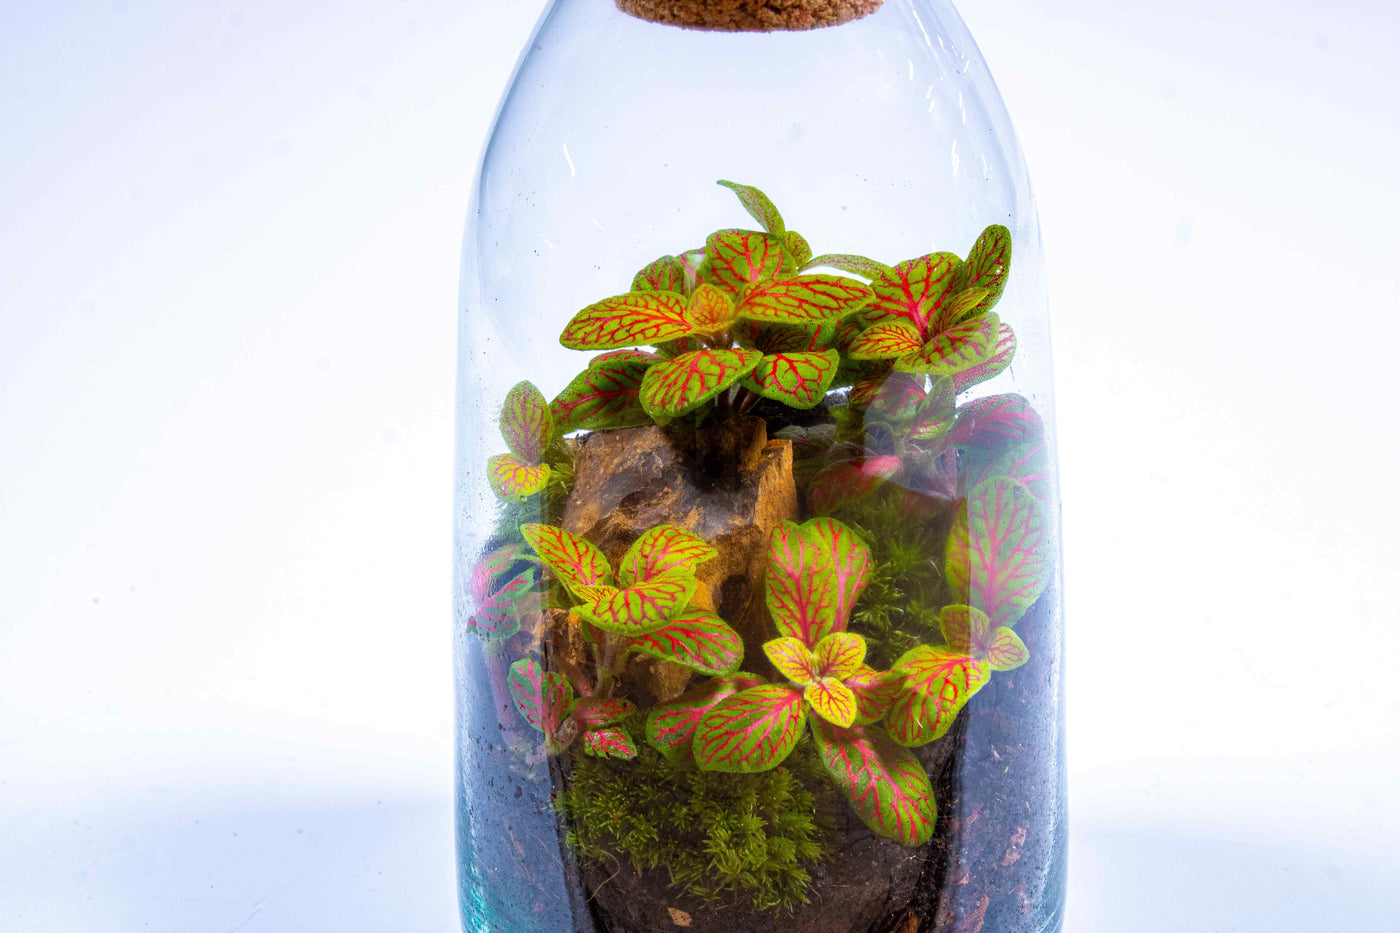 Shop complete terrarium kits including stone, moss plants and more!